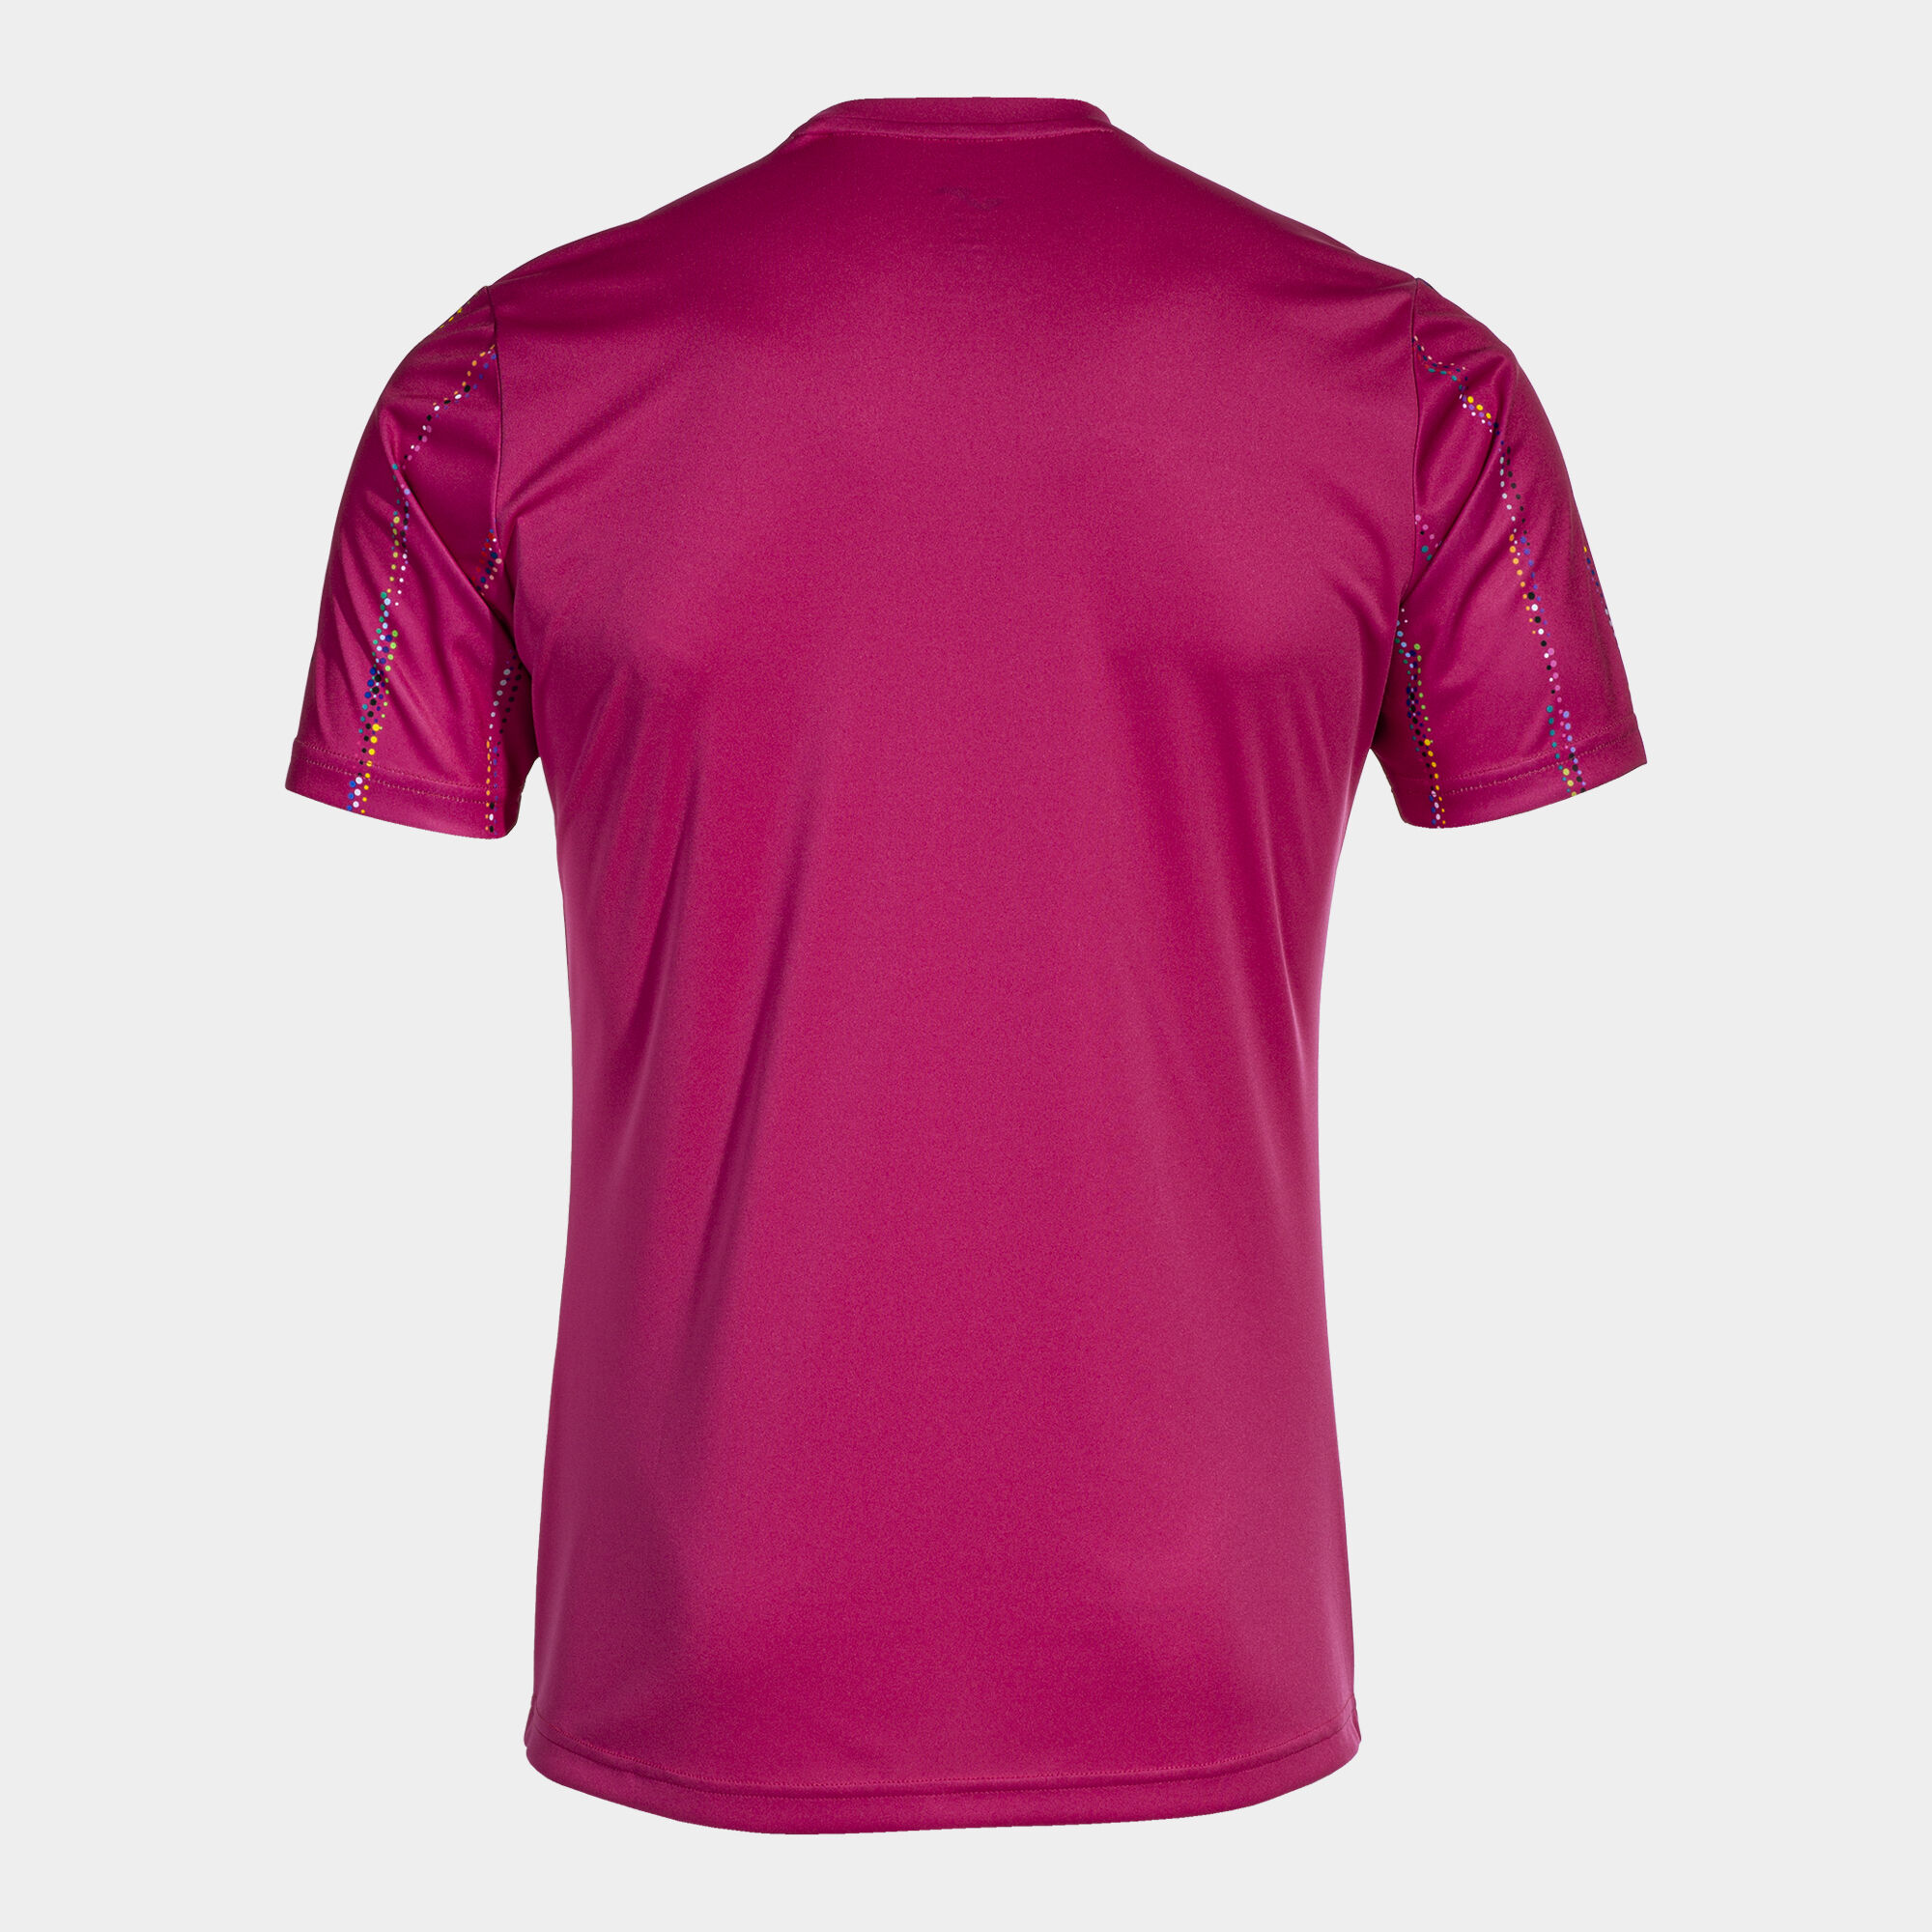 Maillot manches courtes homme Pro team fuchsia